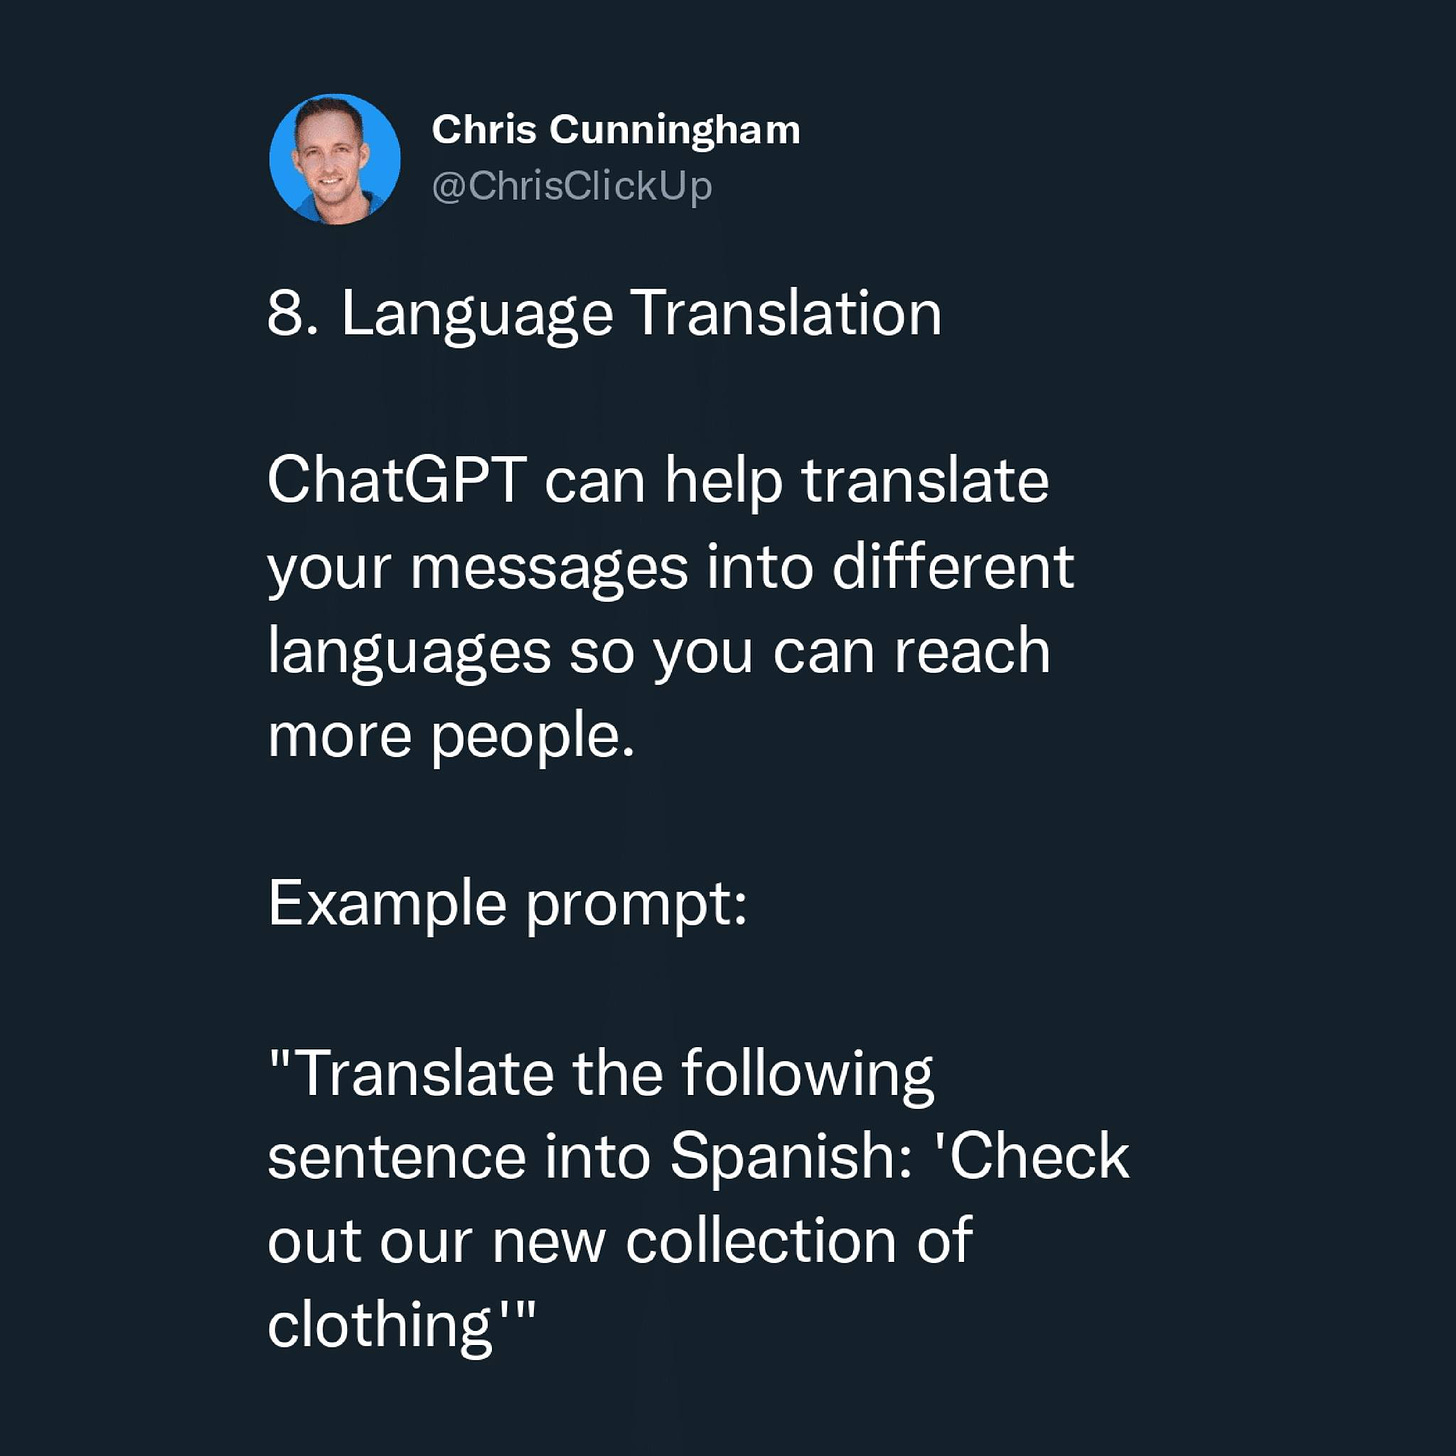 Có thể là ảnh chụp màn hình Twitter về 1 người và văn bản cho biết 'Chris Cunningham @ChrisClickUp 8. Language Translation ChatGPT can help translate your messages into different languages so you can reach more people. Example prompt: "Translate the following sentence into Spanish: 'Check out our new collection of clothing'"'